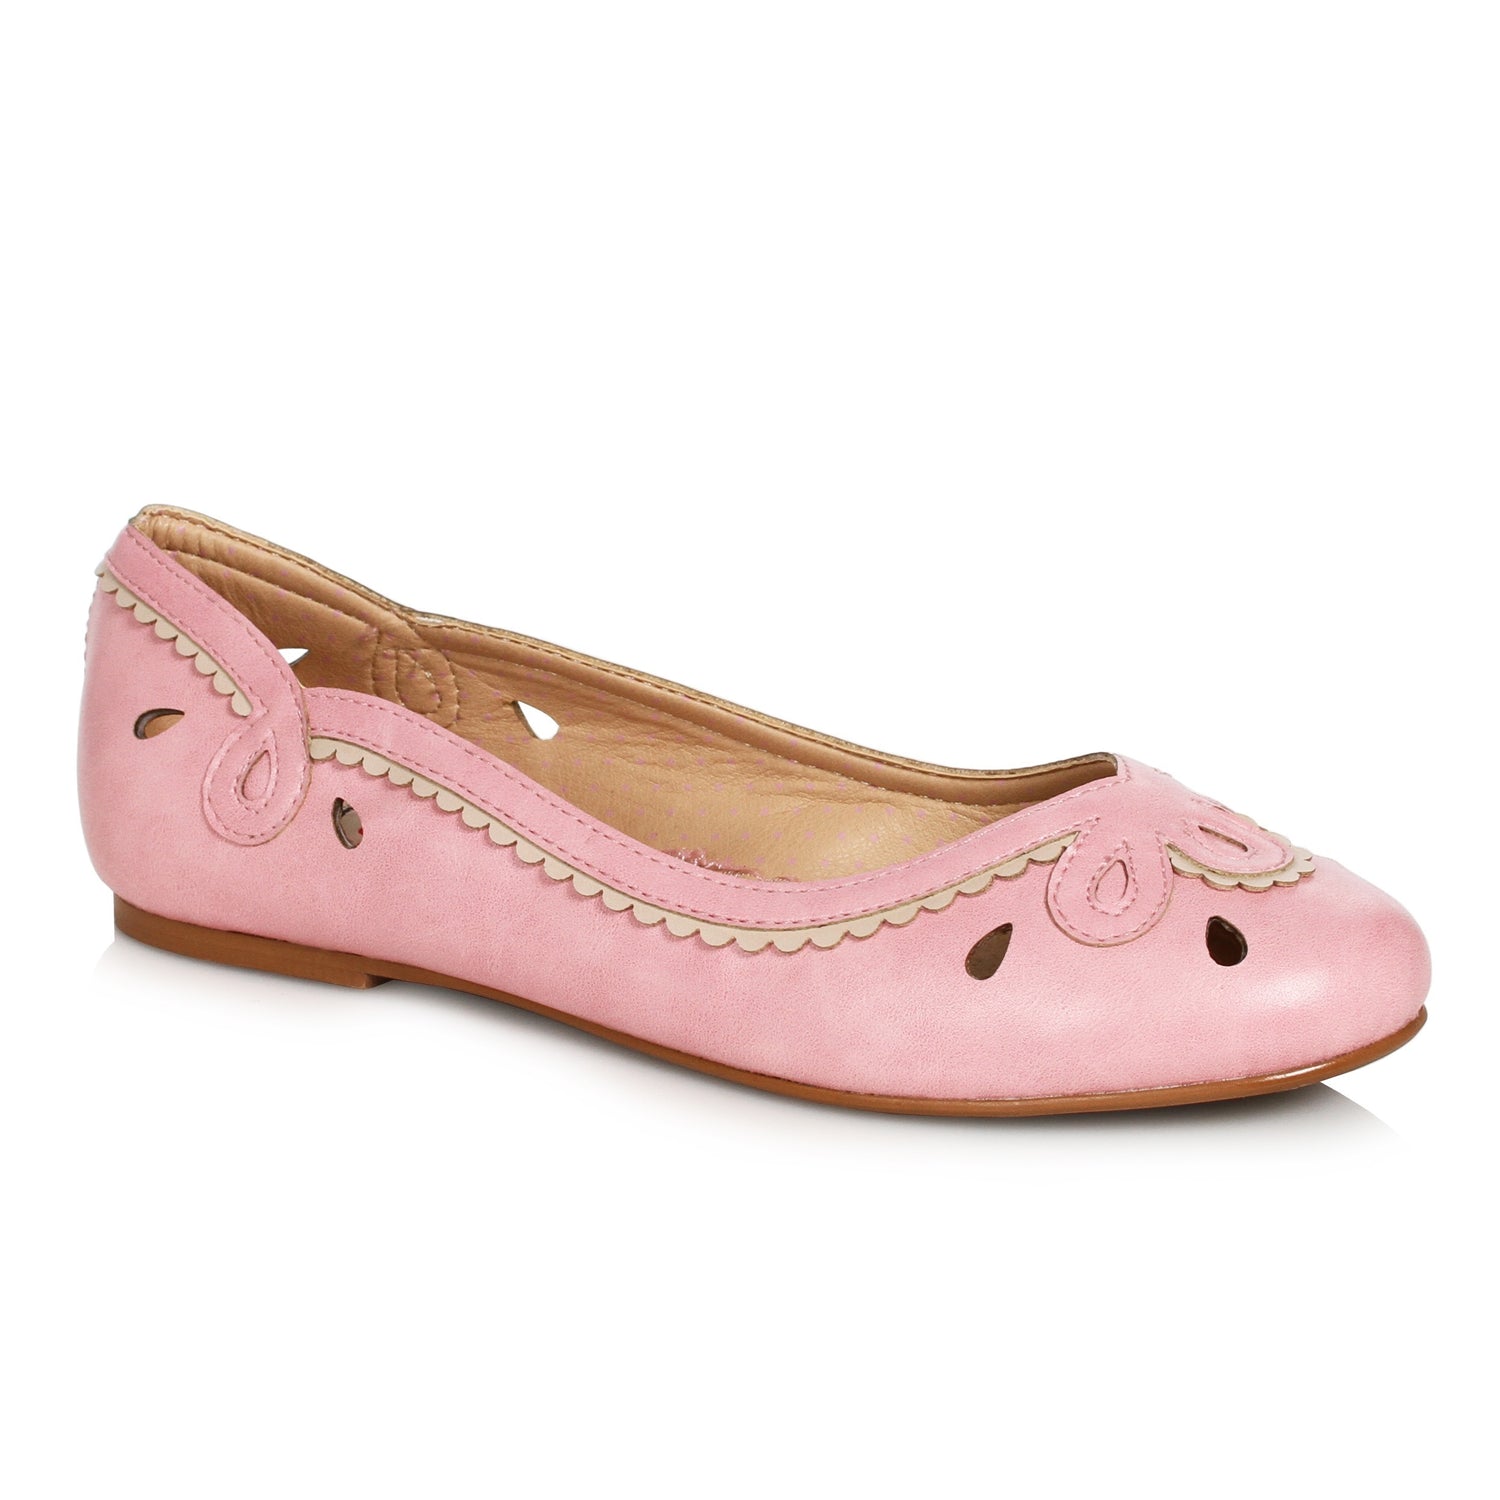 Bettie Page Shoes BP100-Dolly Pink